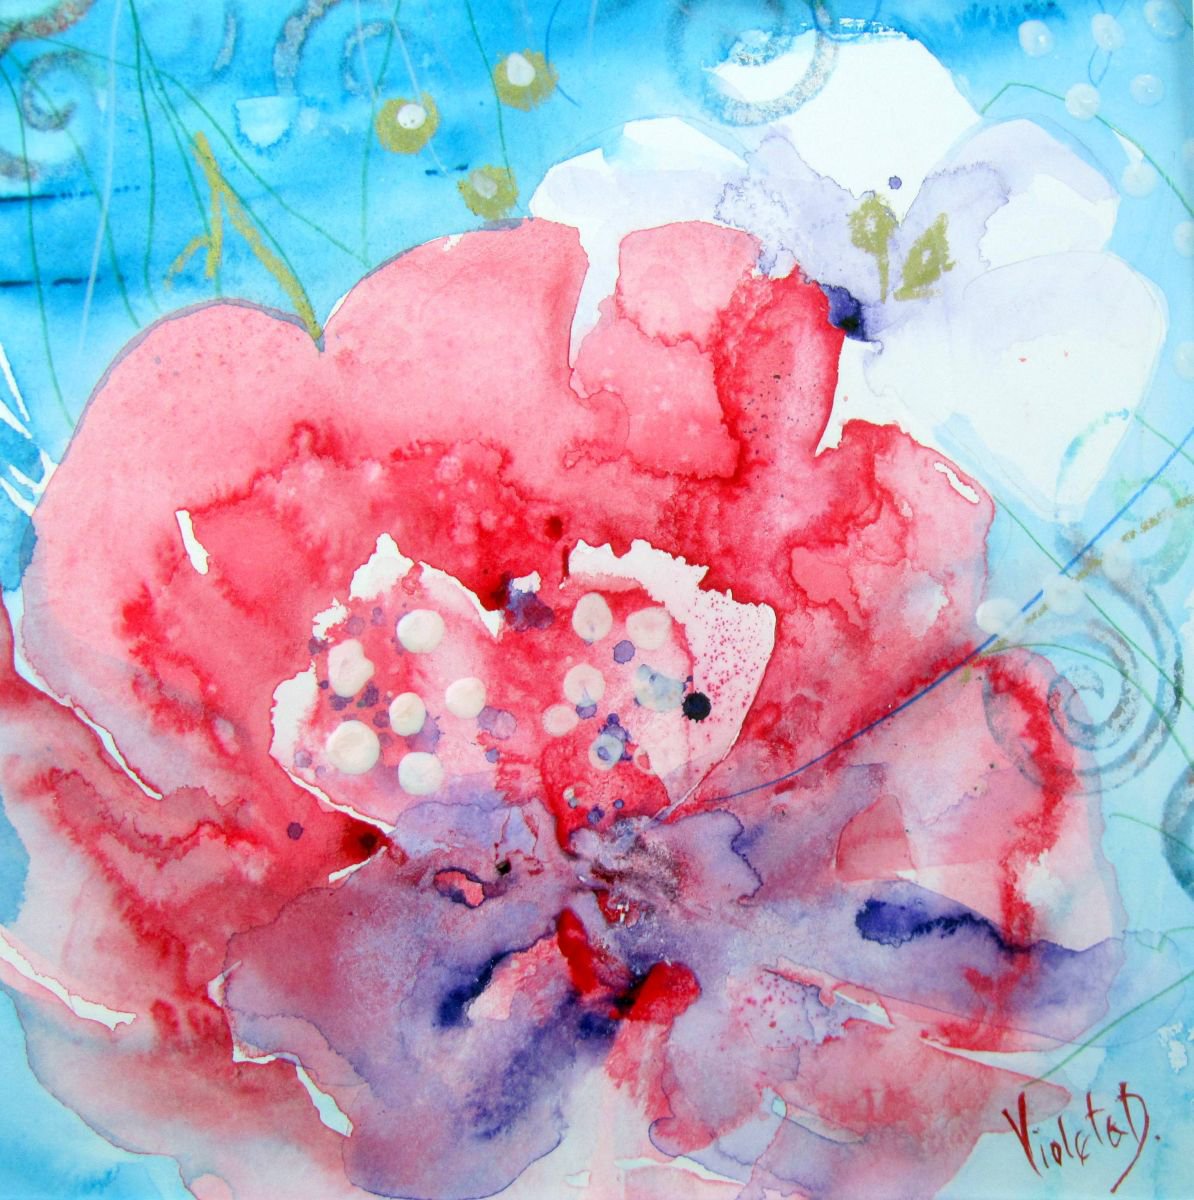 Abstract Rosa Rugosa in Bloom by Violeta Damjanovic-Behrendt